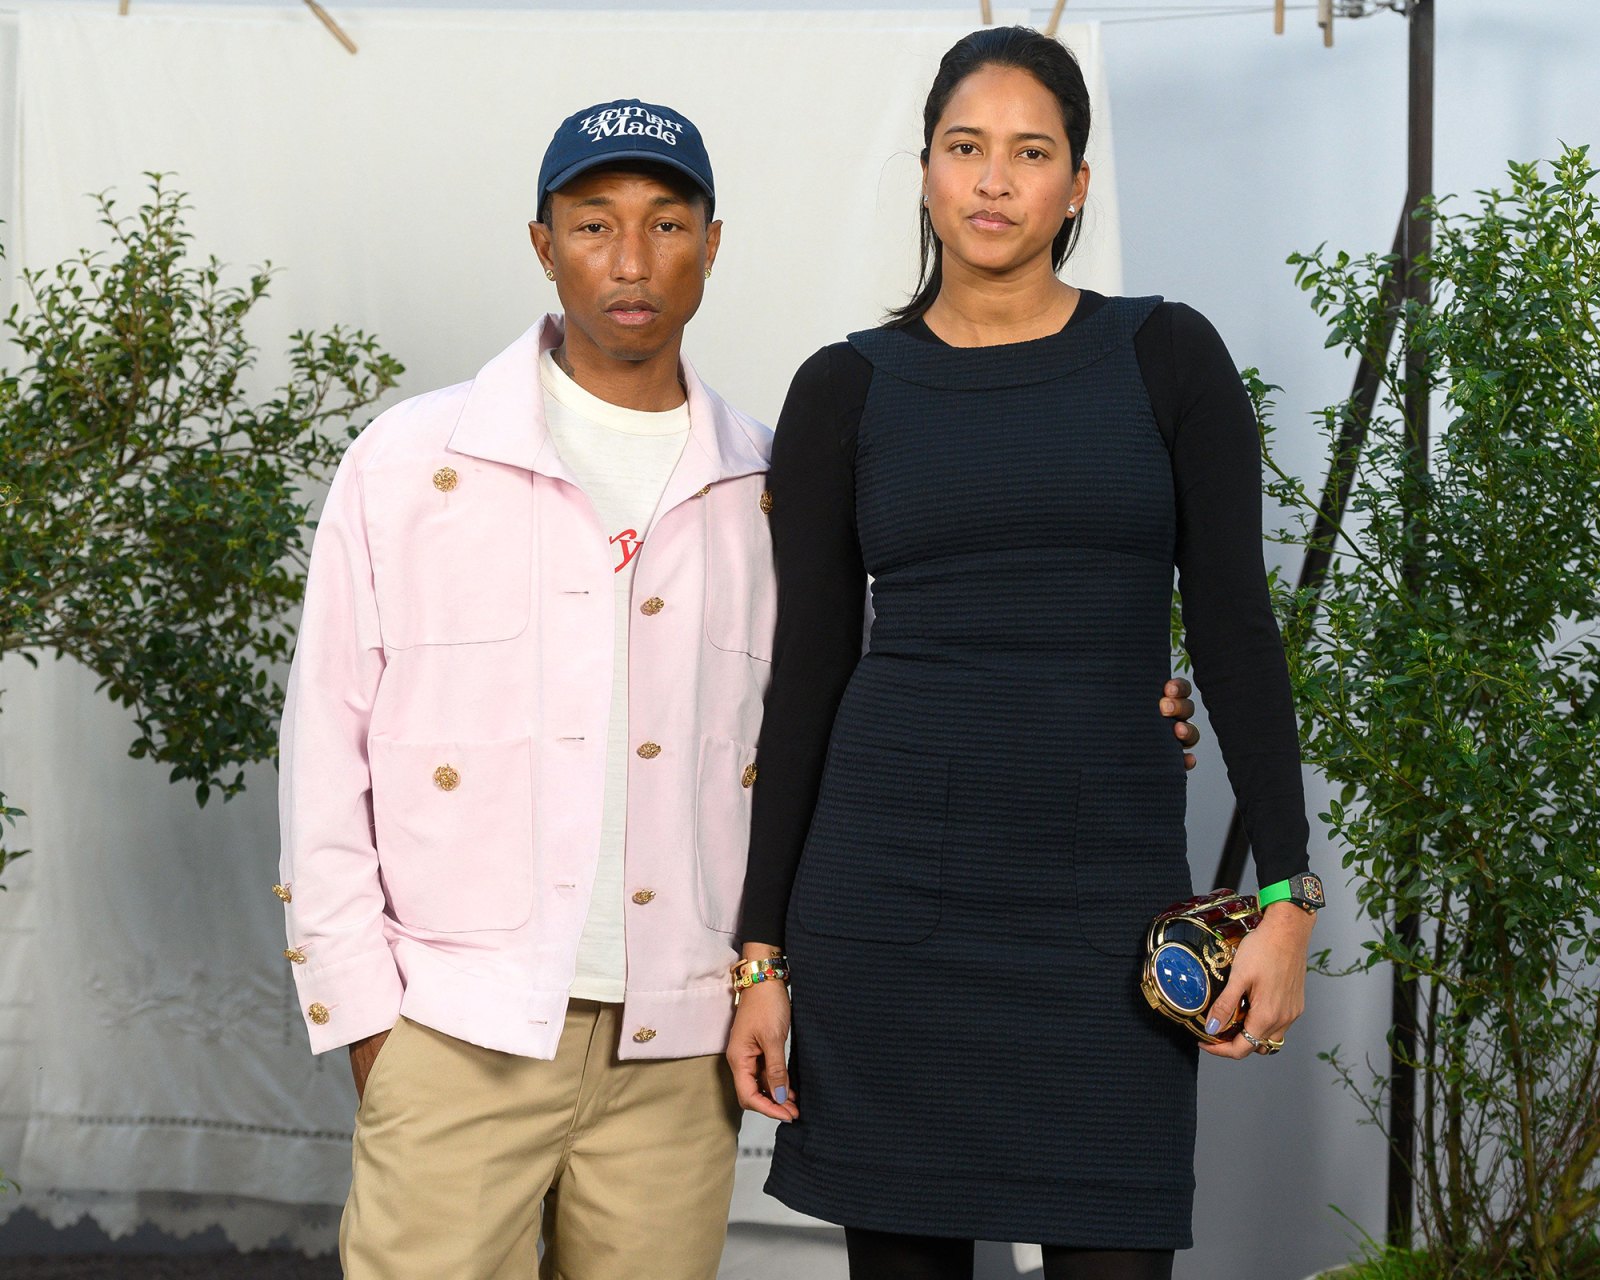 Pharrell Williams and Wife Helen Lasichanh: A Timeline of Their Relationship